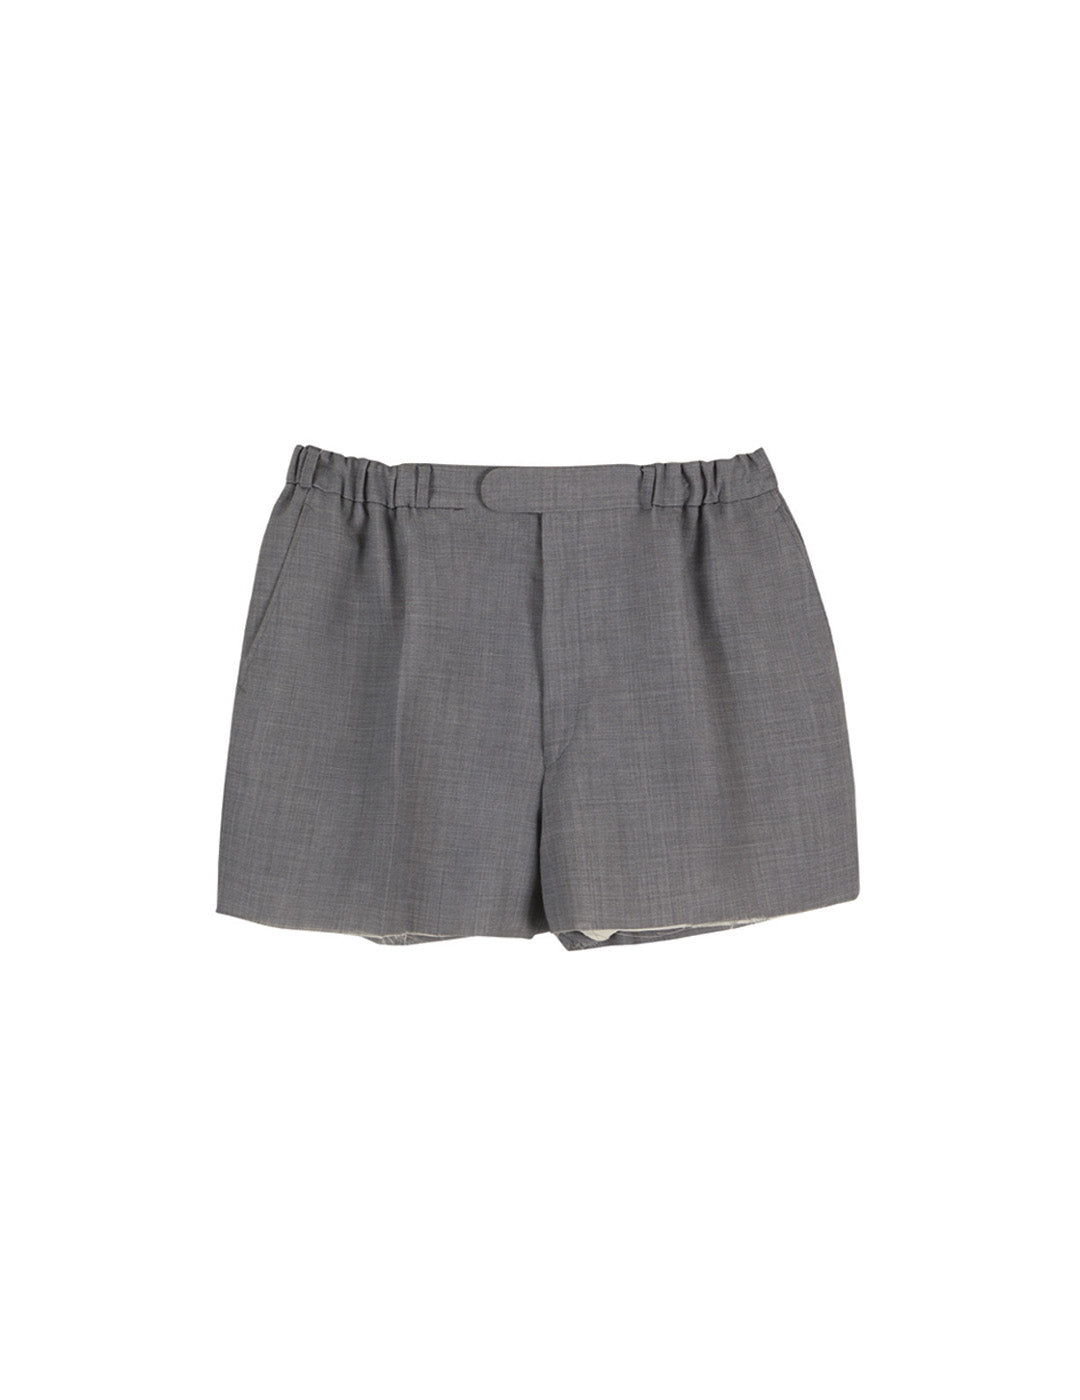 THE SHORT SHORTS IN GREY WOOL